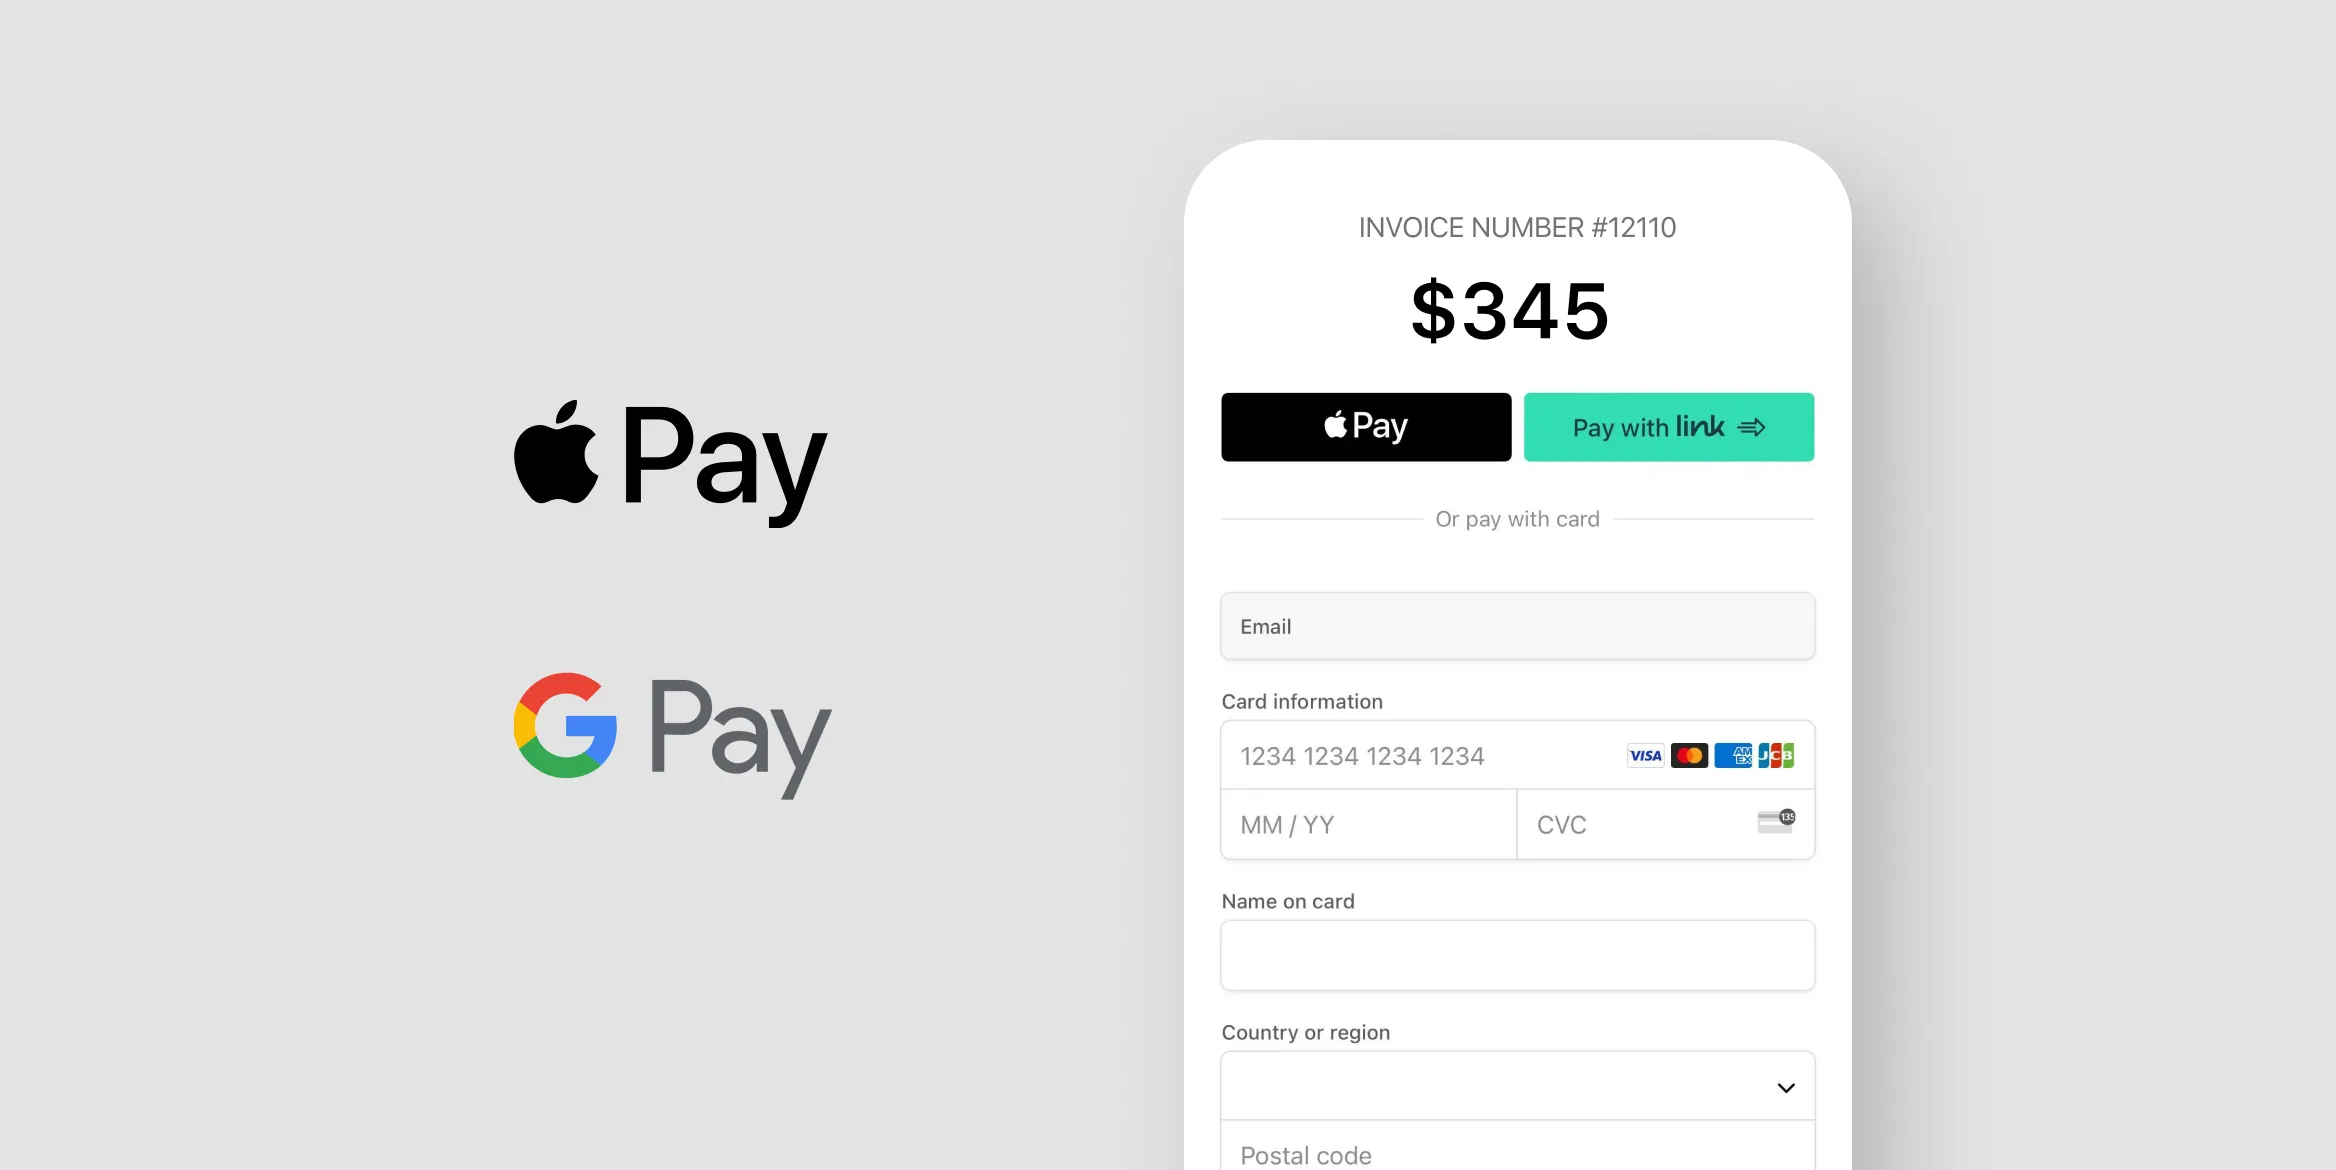 Users can manually pay invoice using Apple Pay and Google Pay